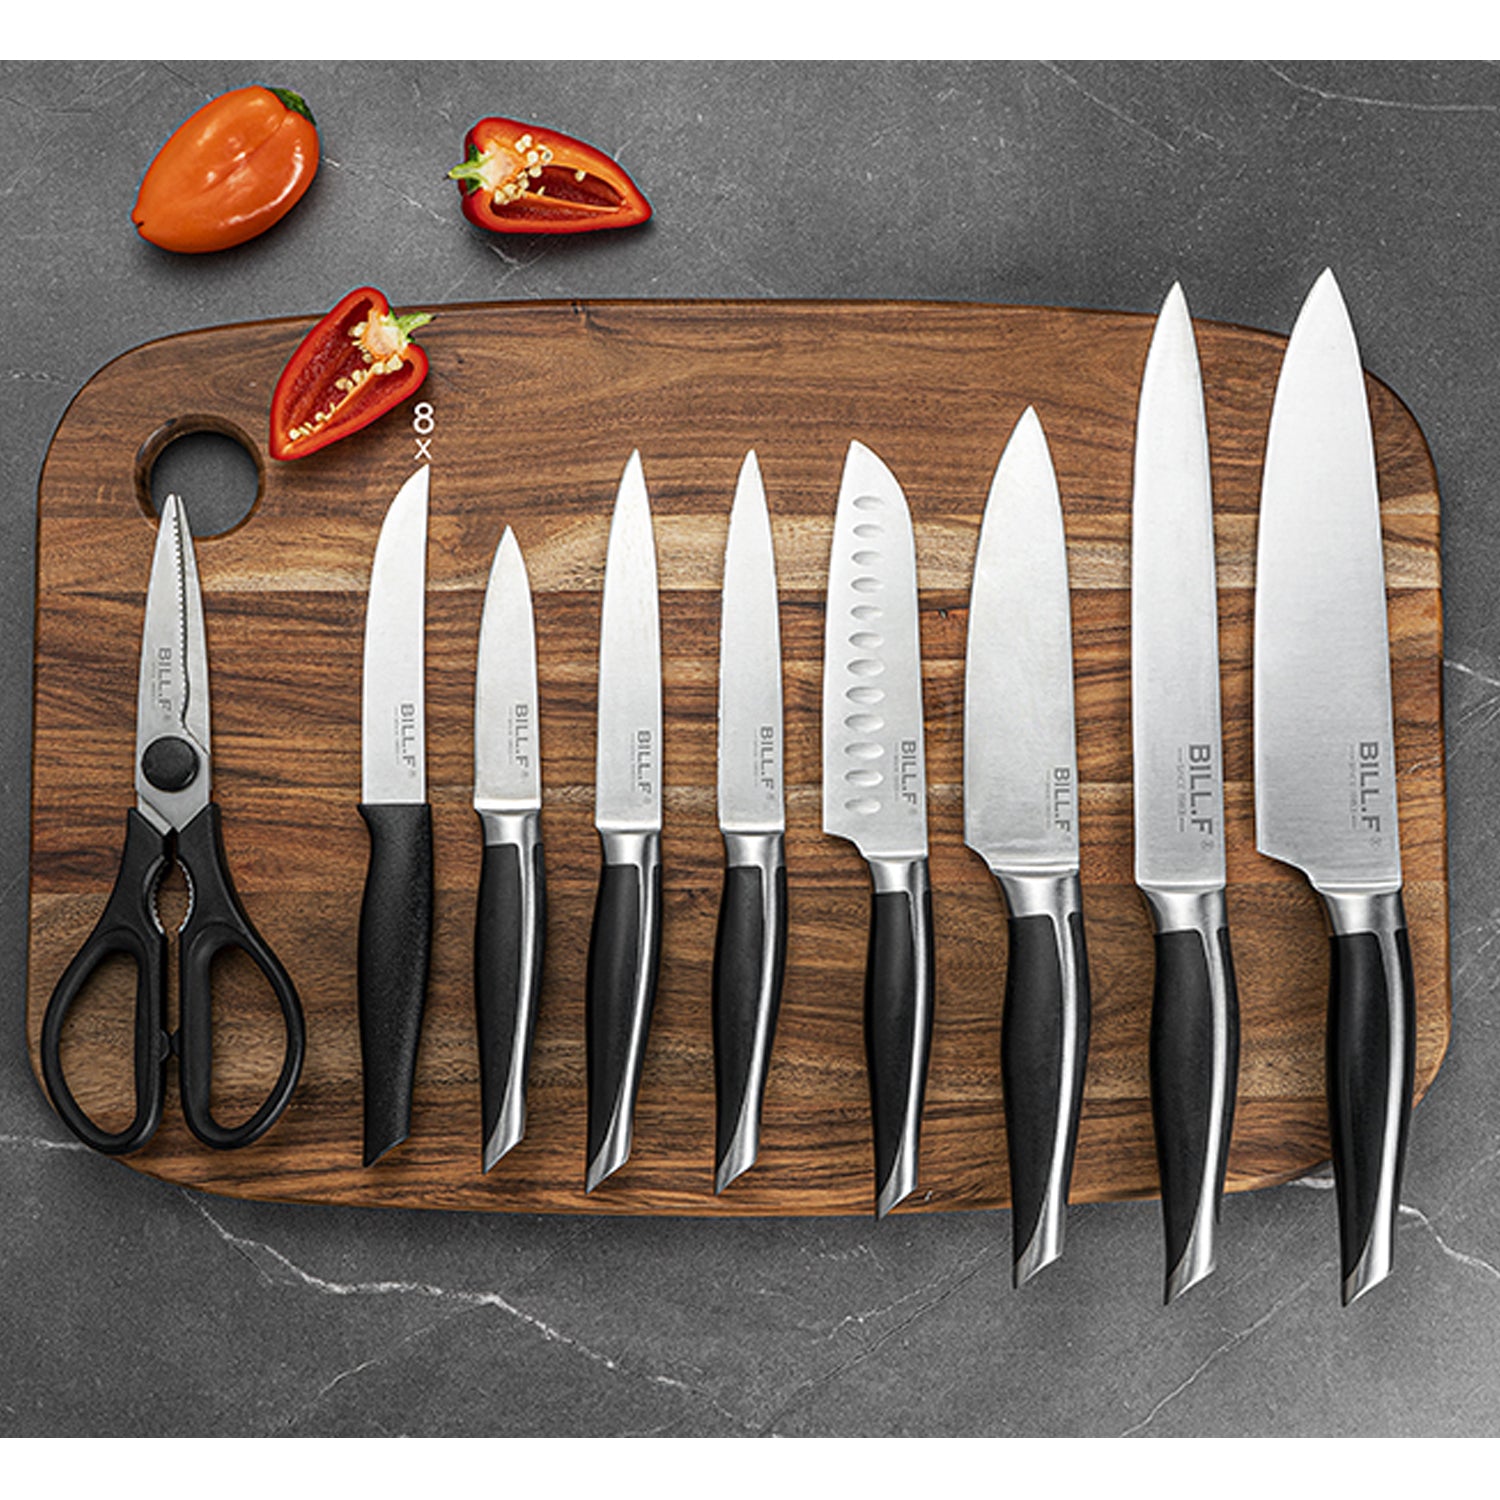 16 Pieces Chef Knife Set Professional Stainless Steel Kitchen Knives C –  BillF